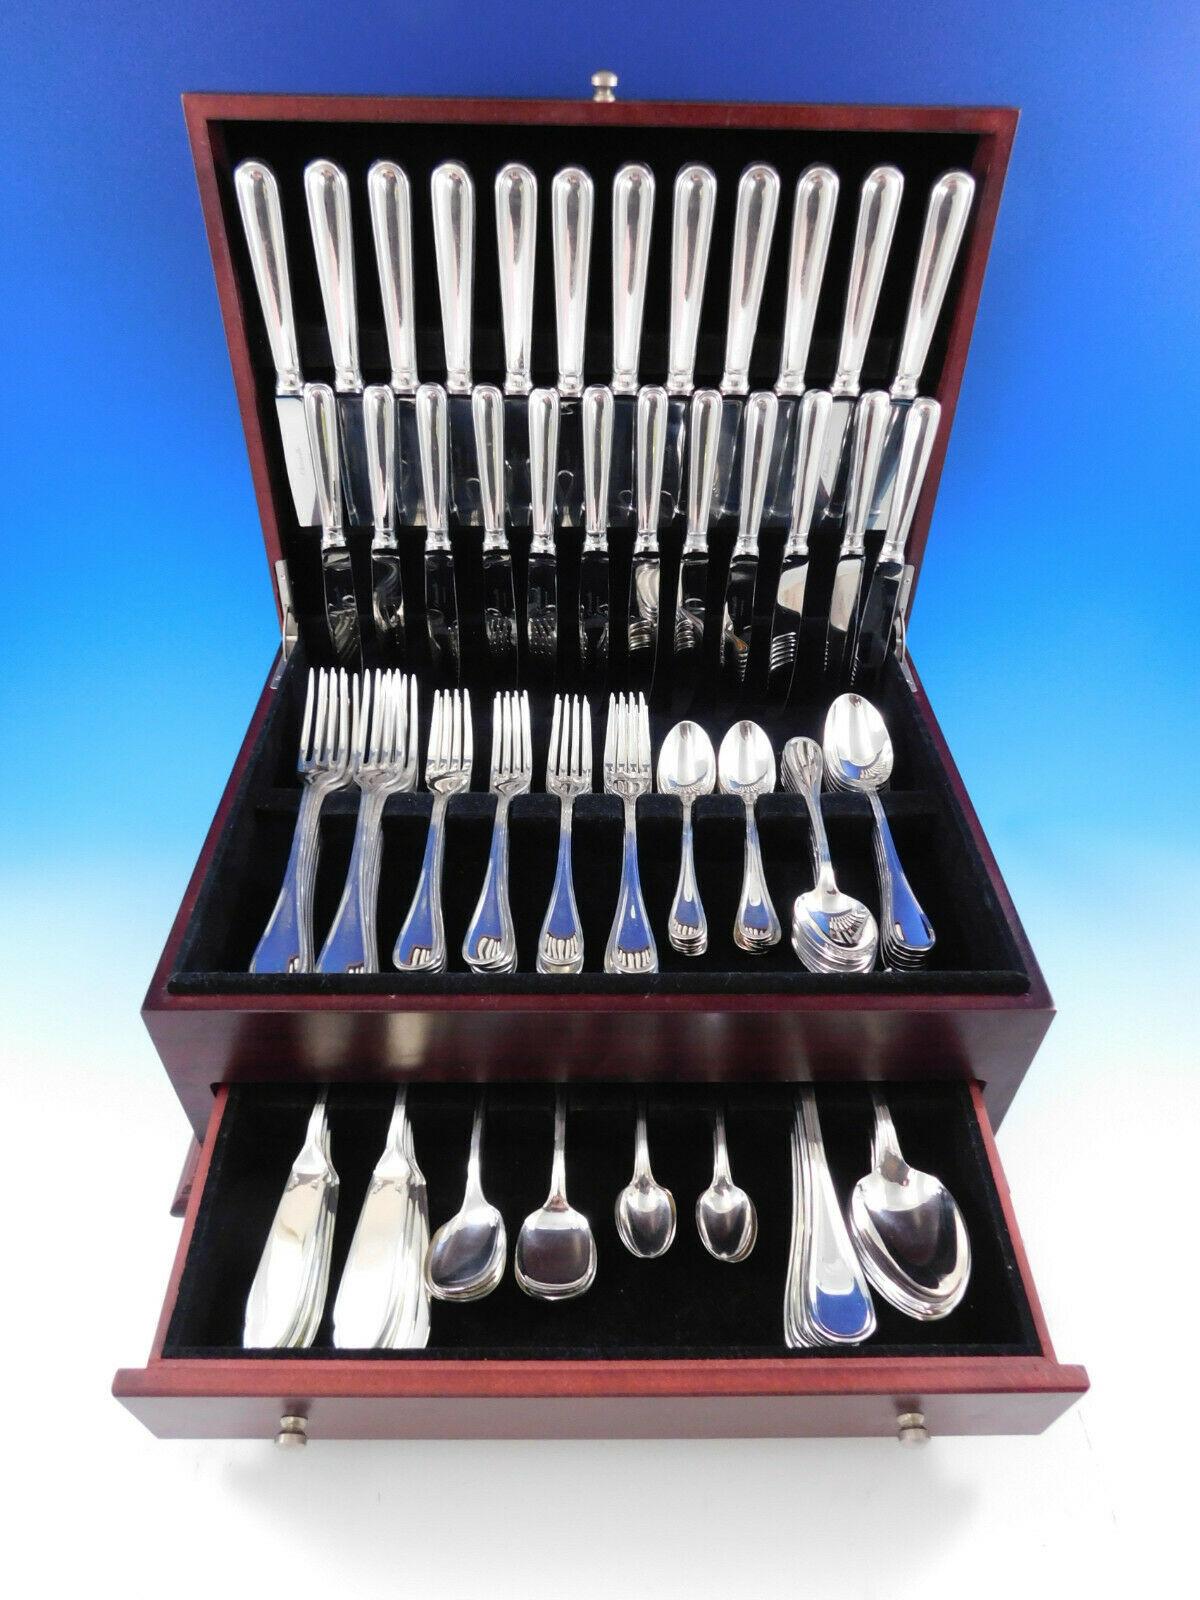 Monumental dinner size Albi by Christofle France silverplated flatware set - 132 pieces. This set includes:

12 dinner size knives, 9 3/4